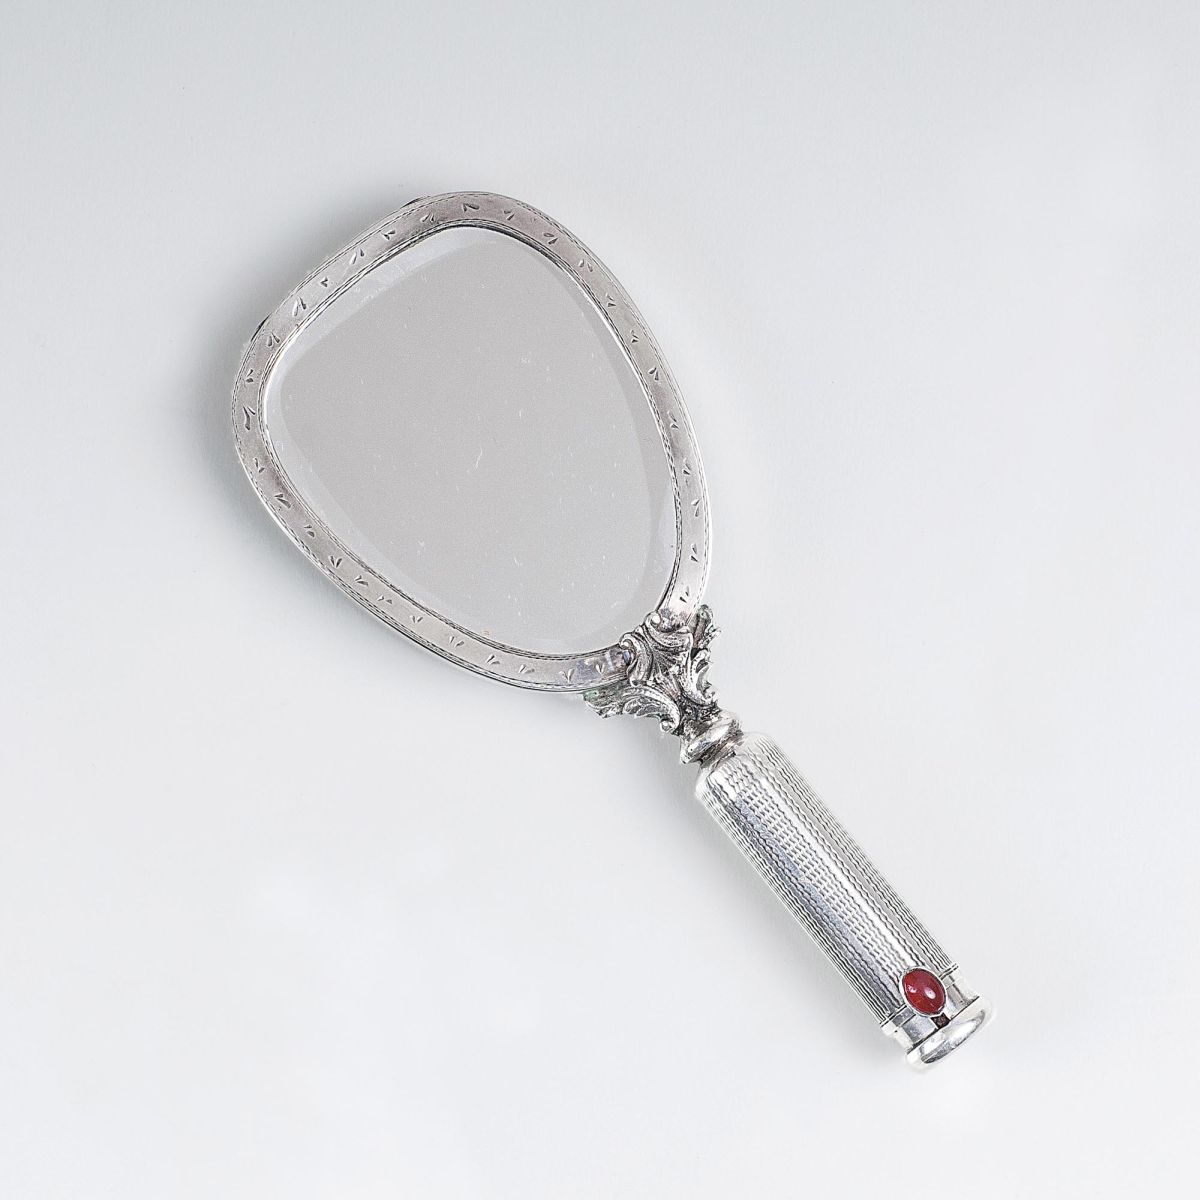 A Hand Mirror with small Compartments